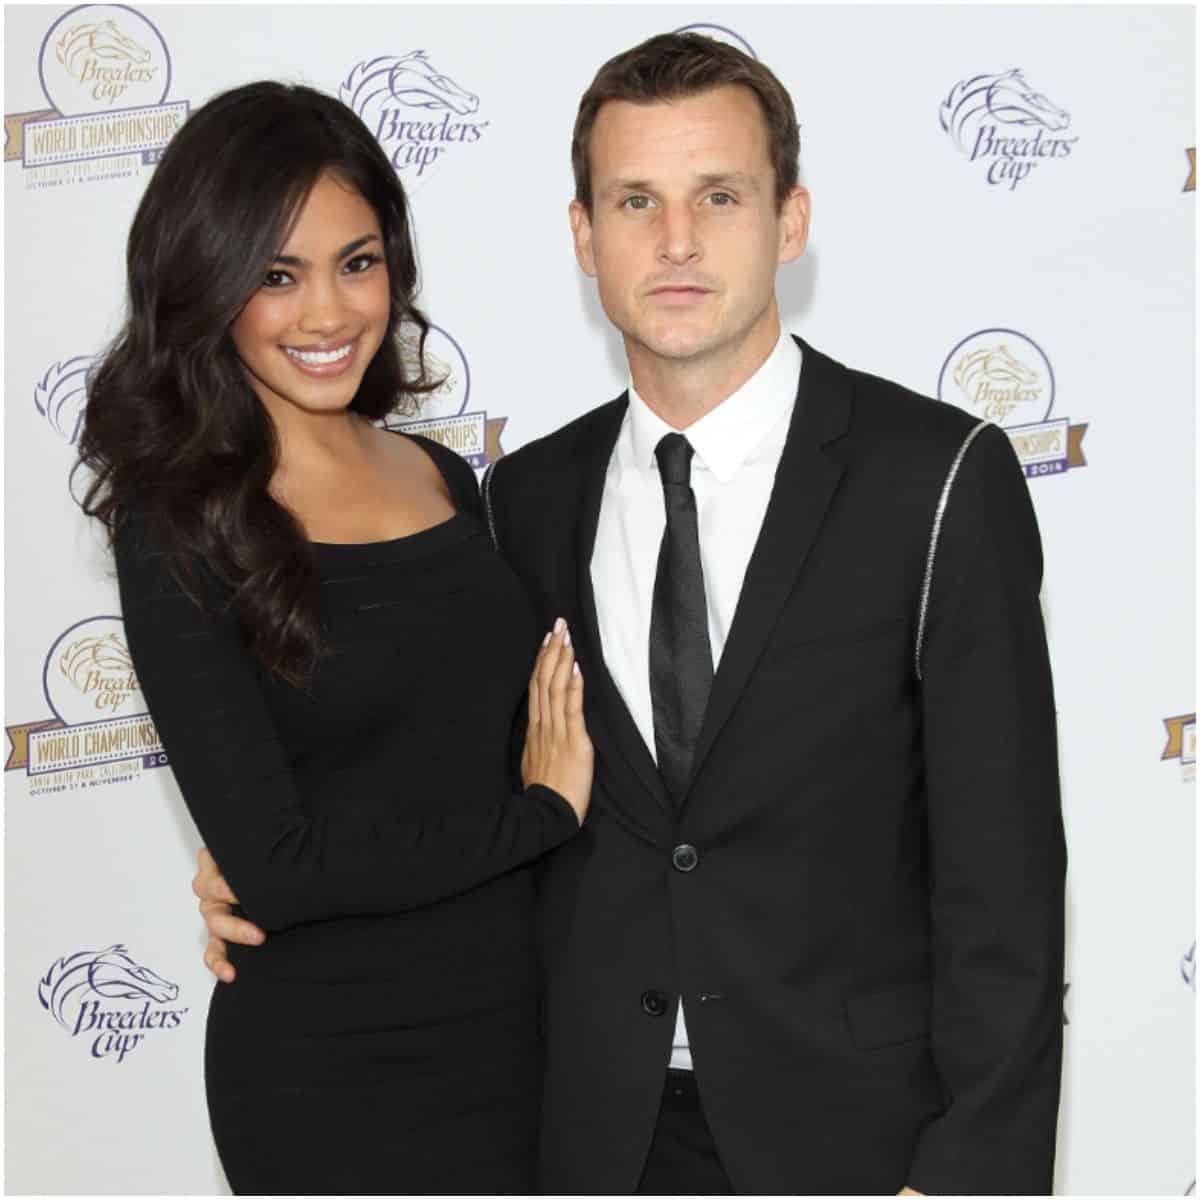 Rob Dyrdek with his wife Bryiana Noelle Flores